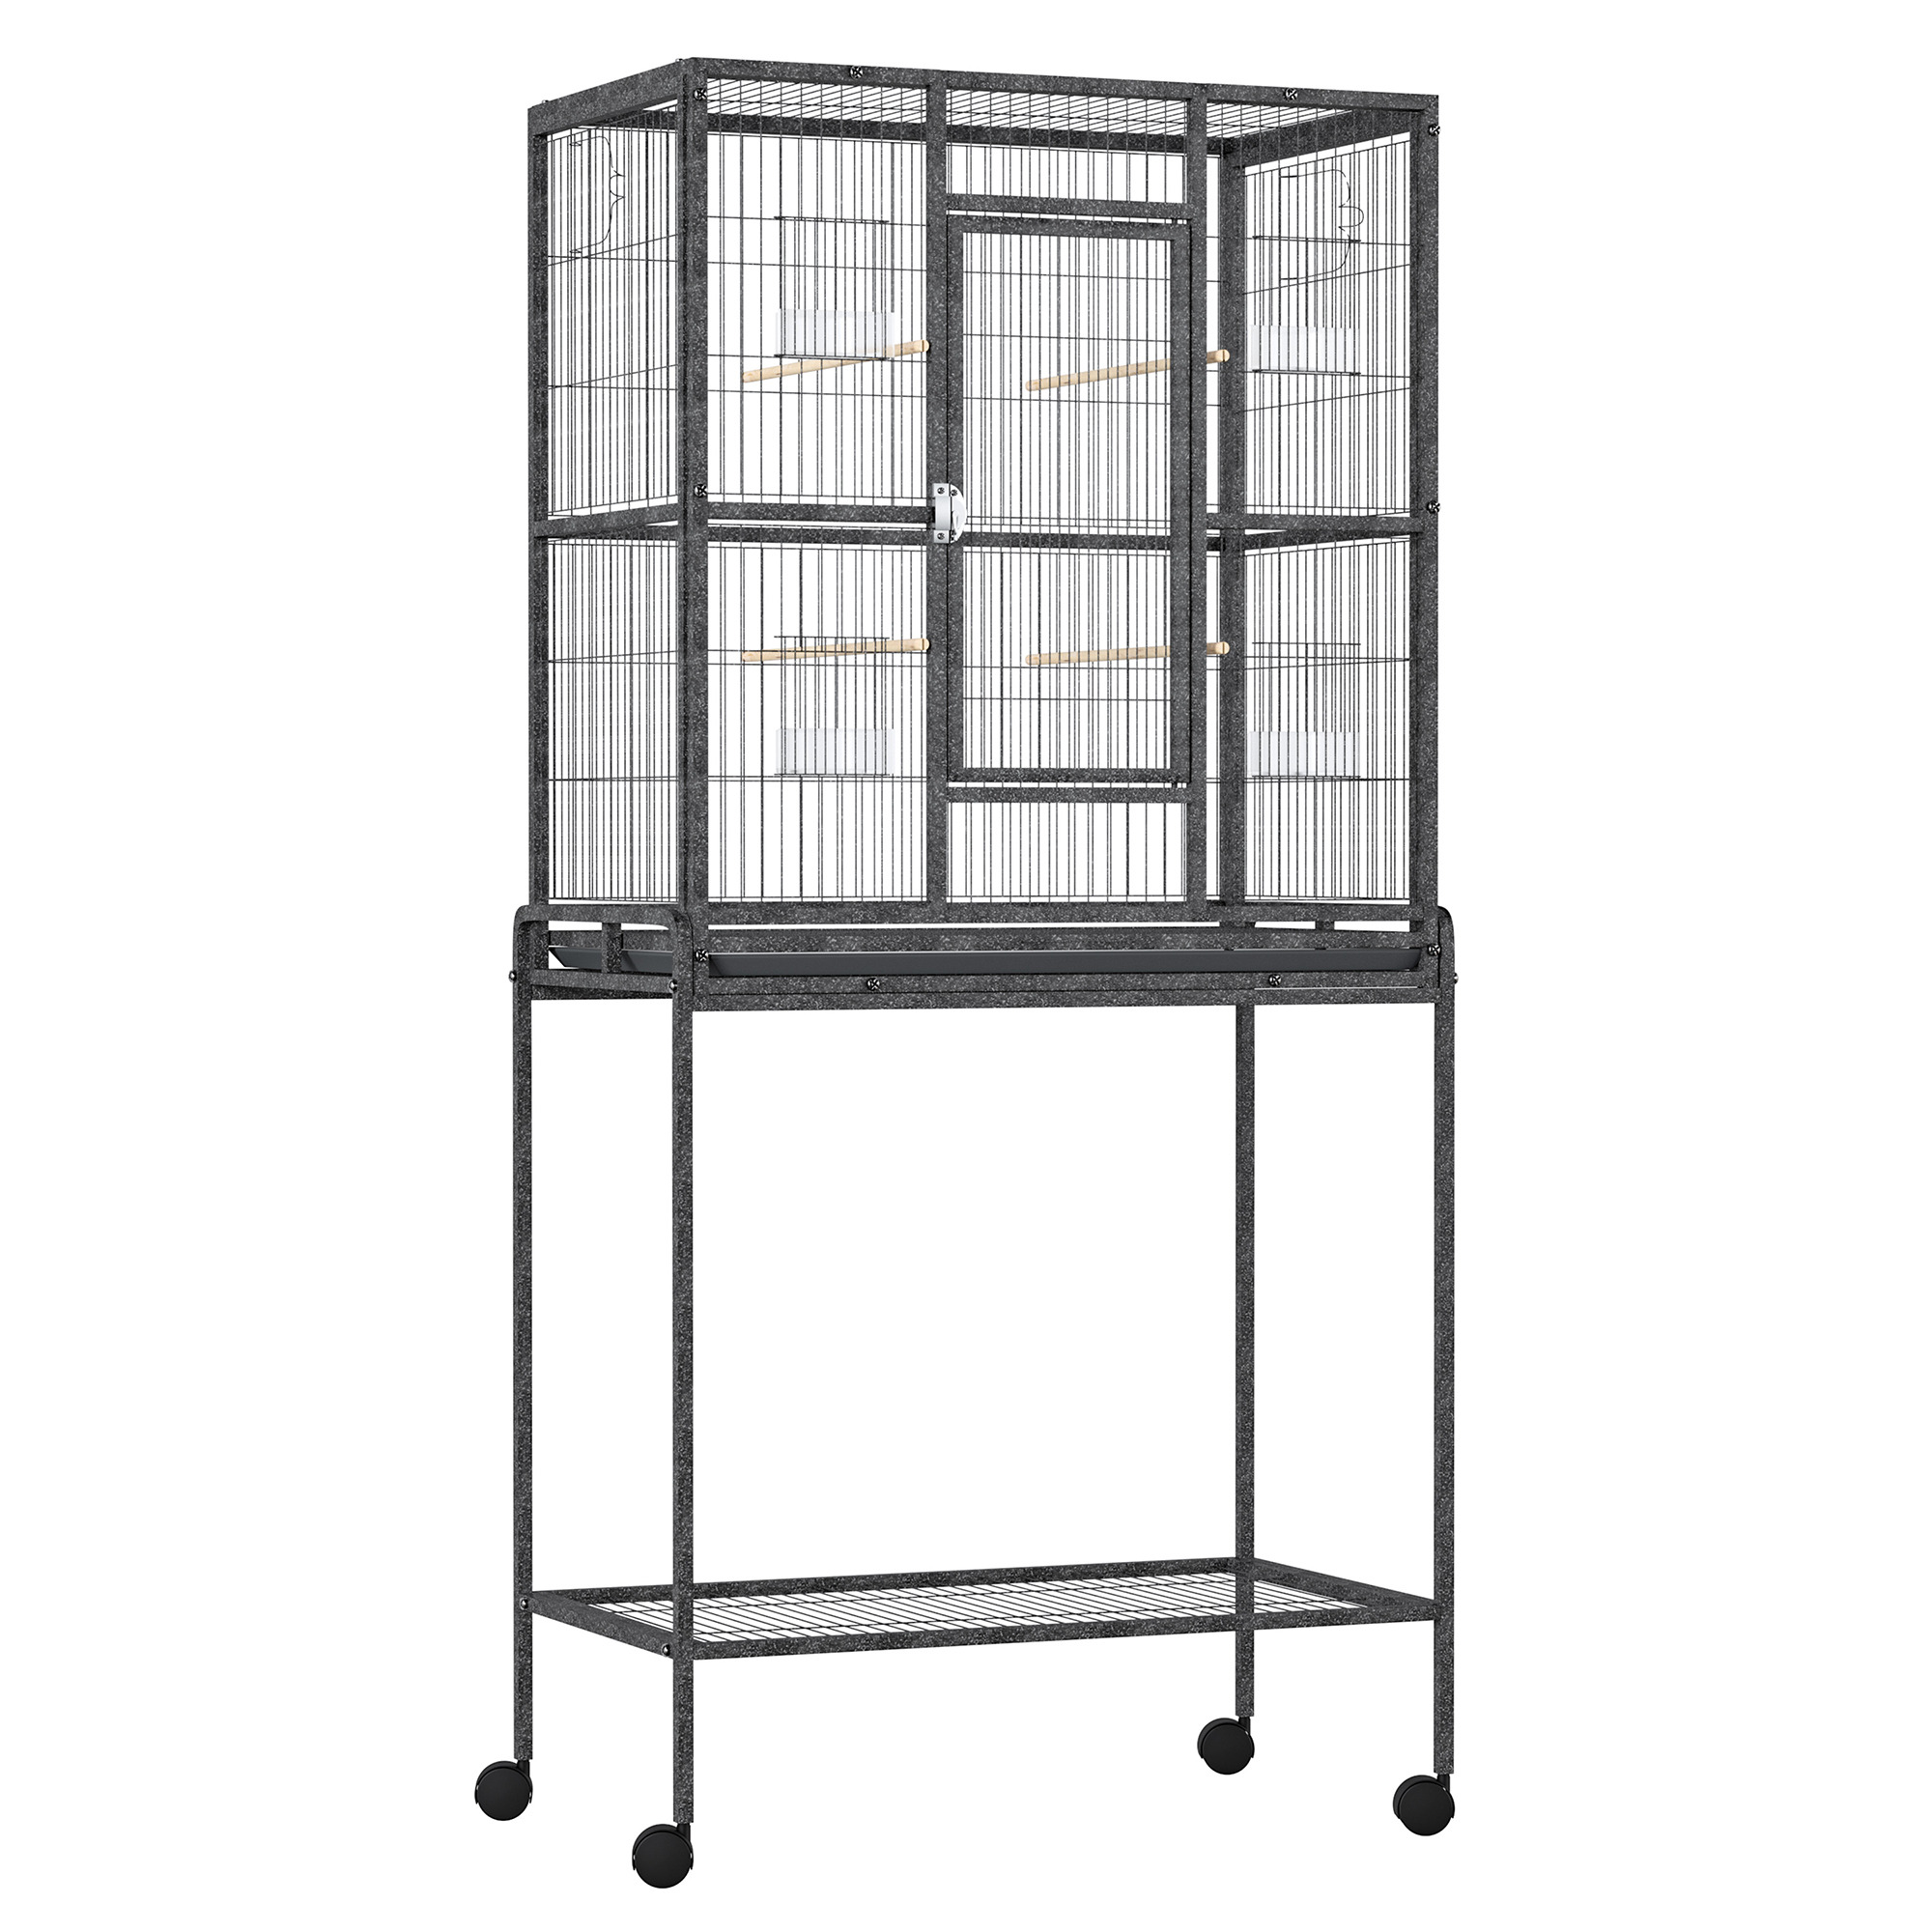 PawHut Bird Cage Metal Canary Cages for Parakeet with Detachable Rolling Stand, Storage Shelf, Wood Perch, Food Container